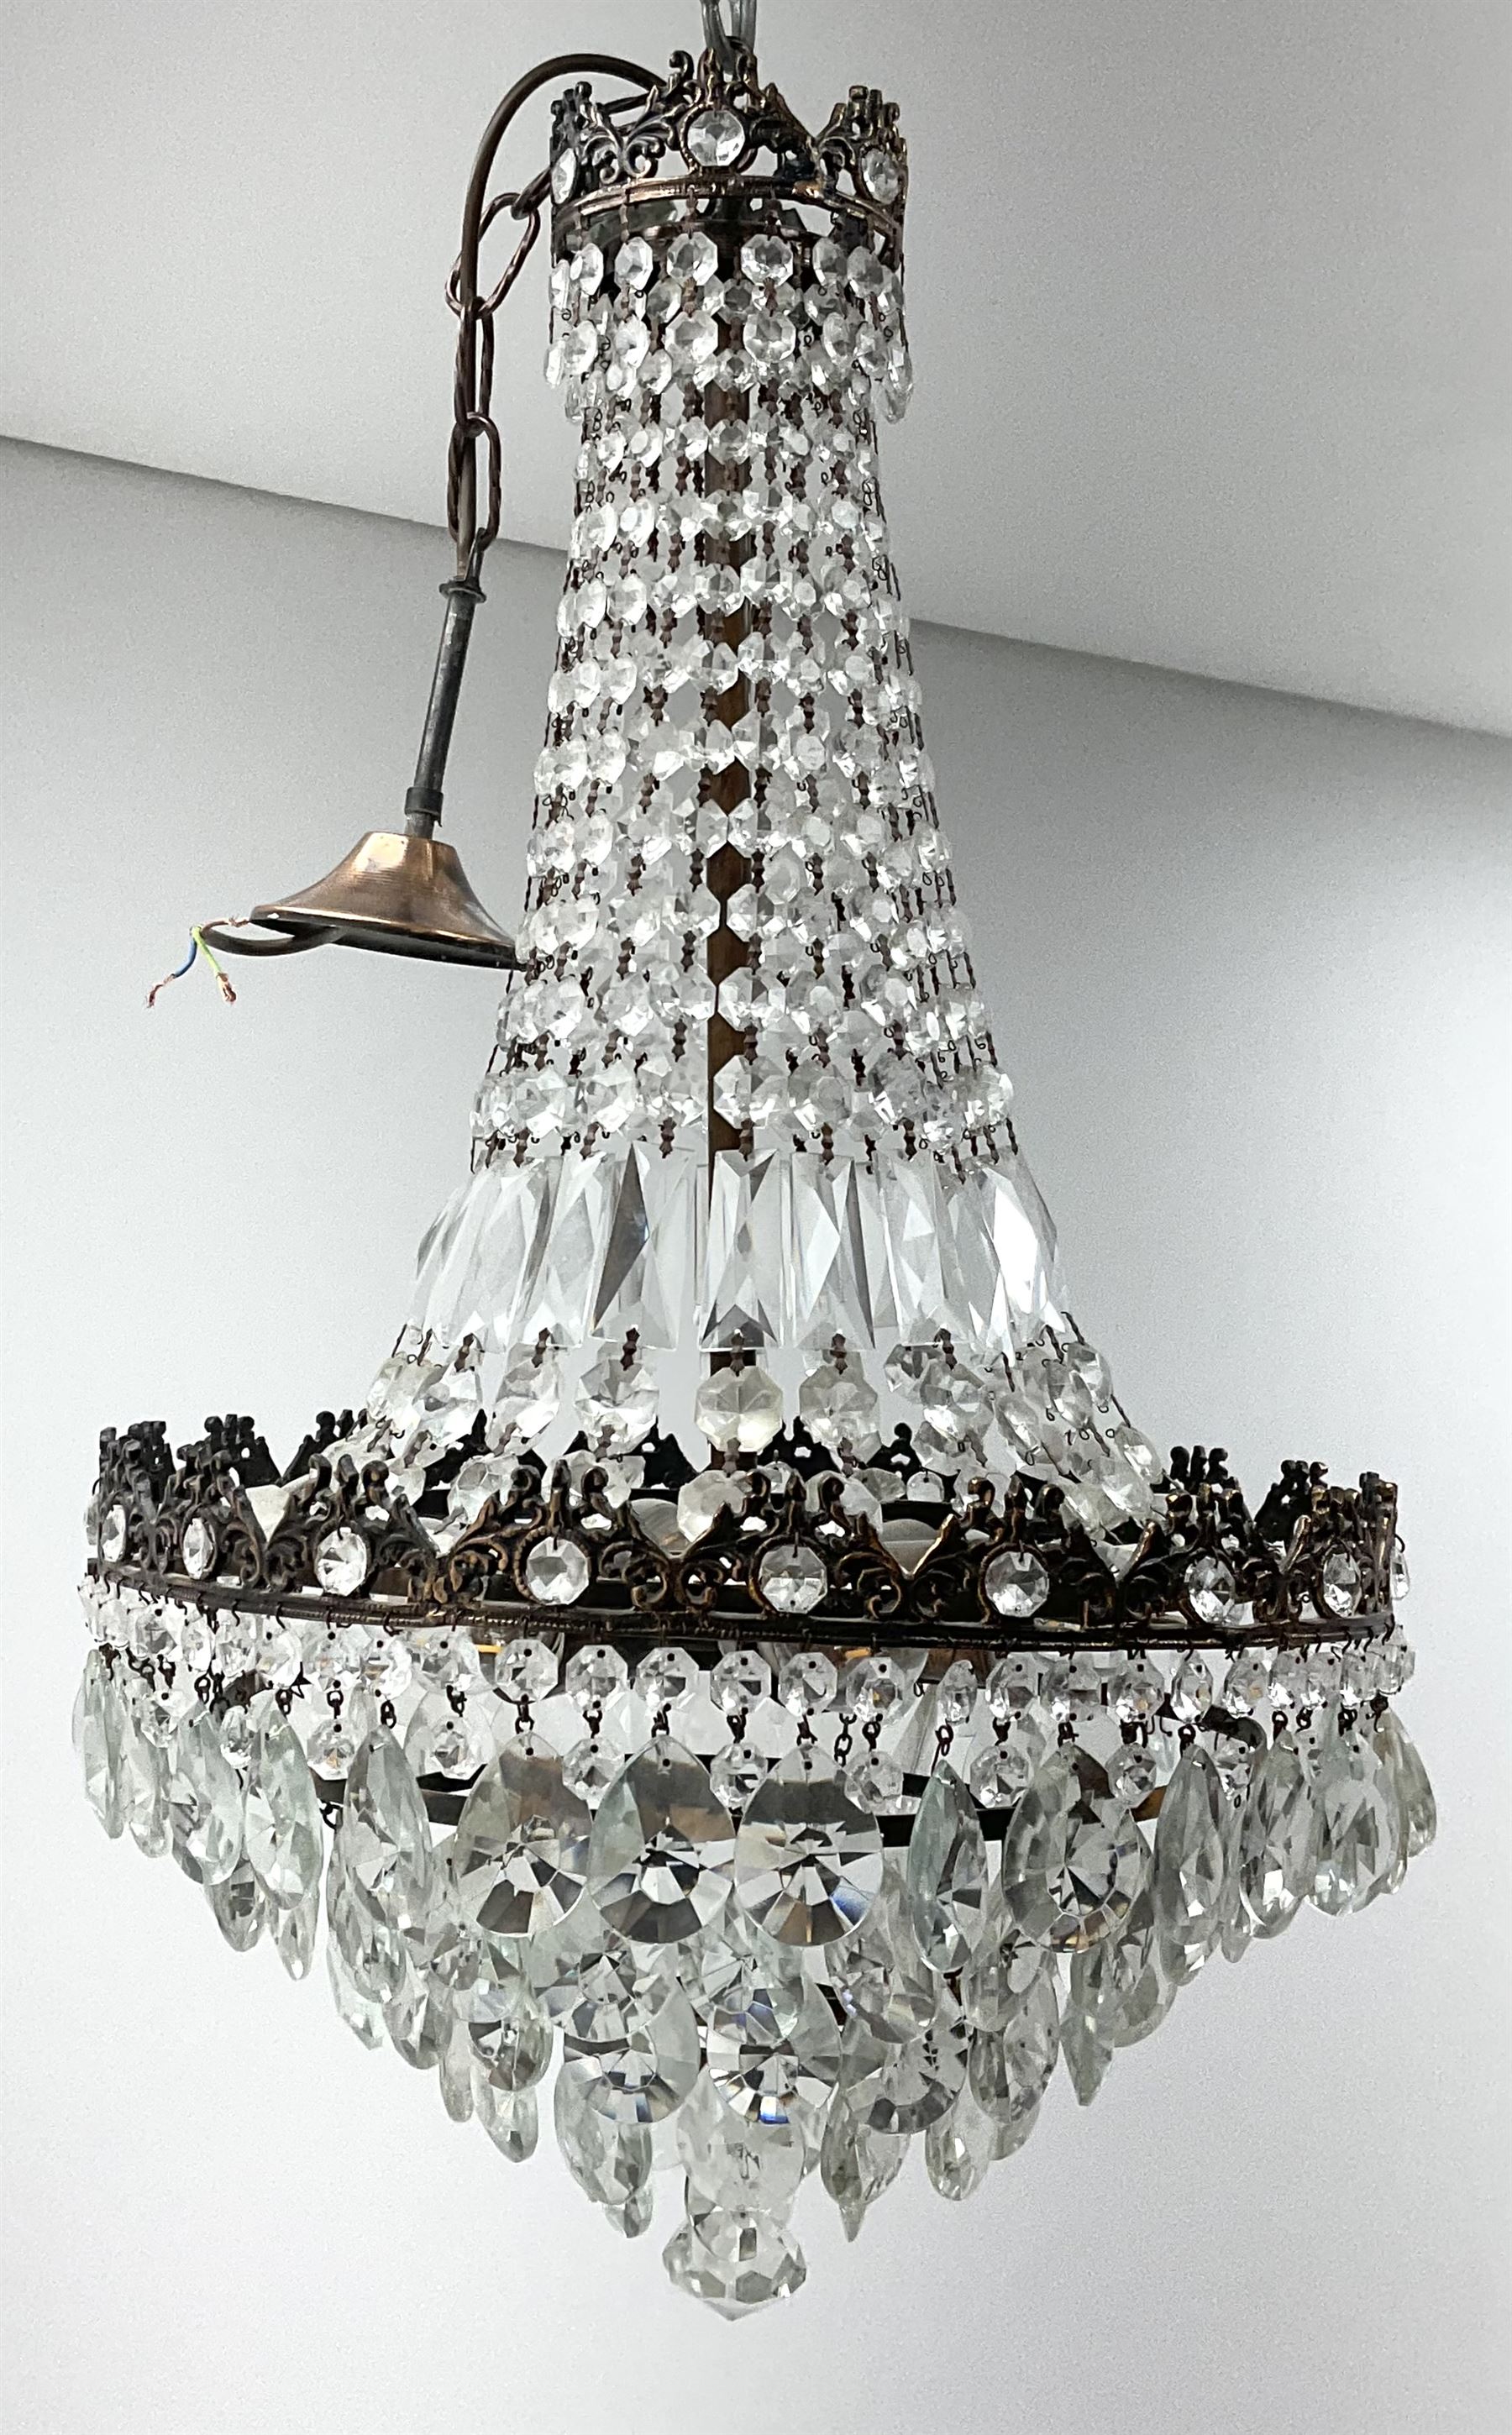 An early 20th century waterfall chandelier